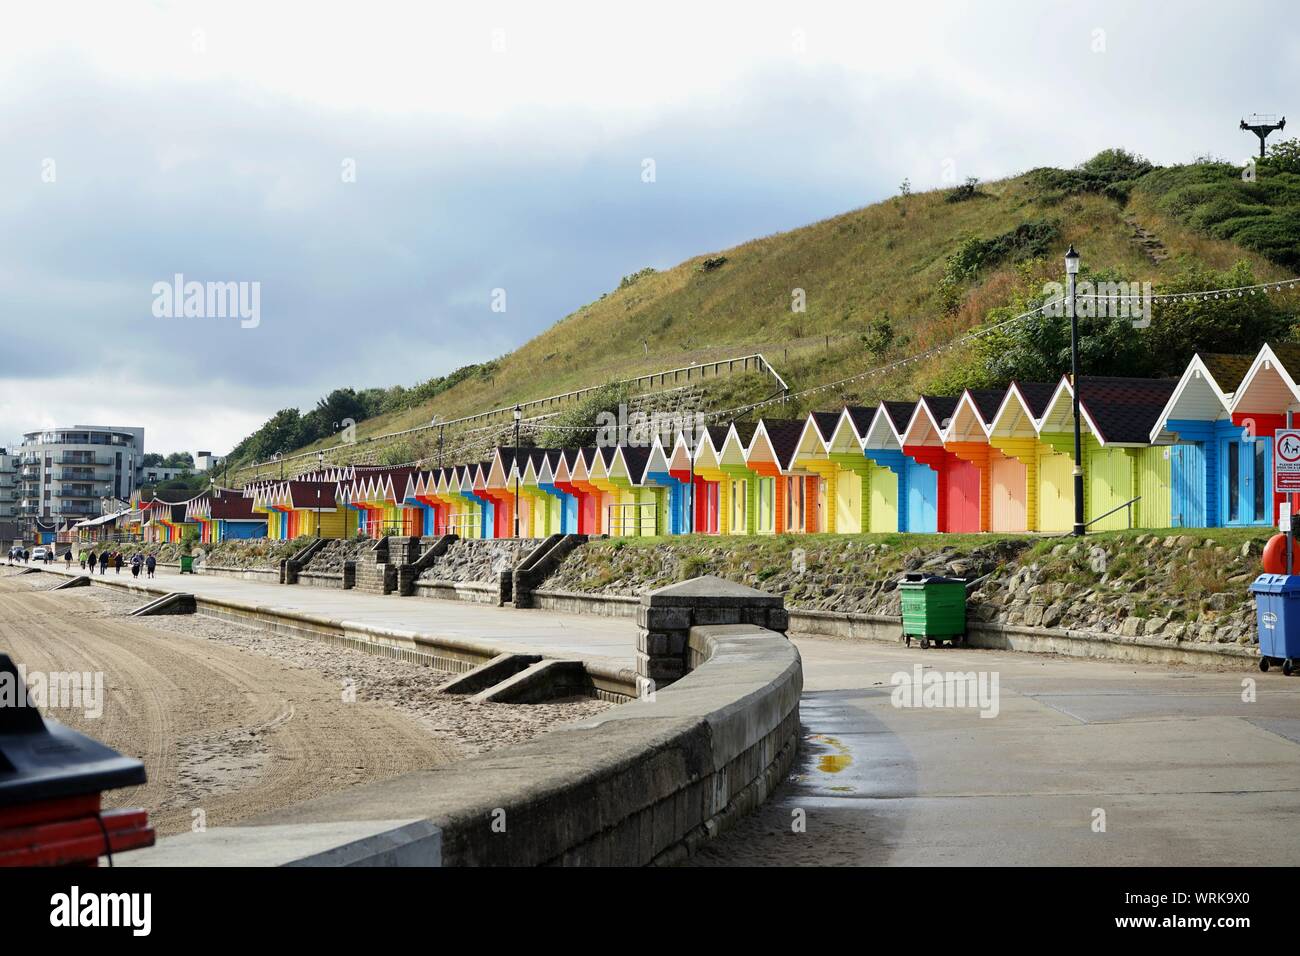 The colourfull beach huts at the north bay in Scarborough with the promenade and sandy beach Scarborough Yorkshire England Stock Photo